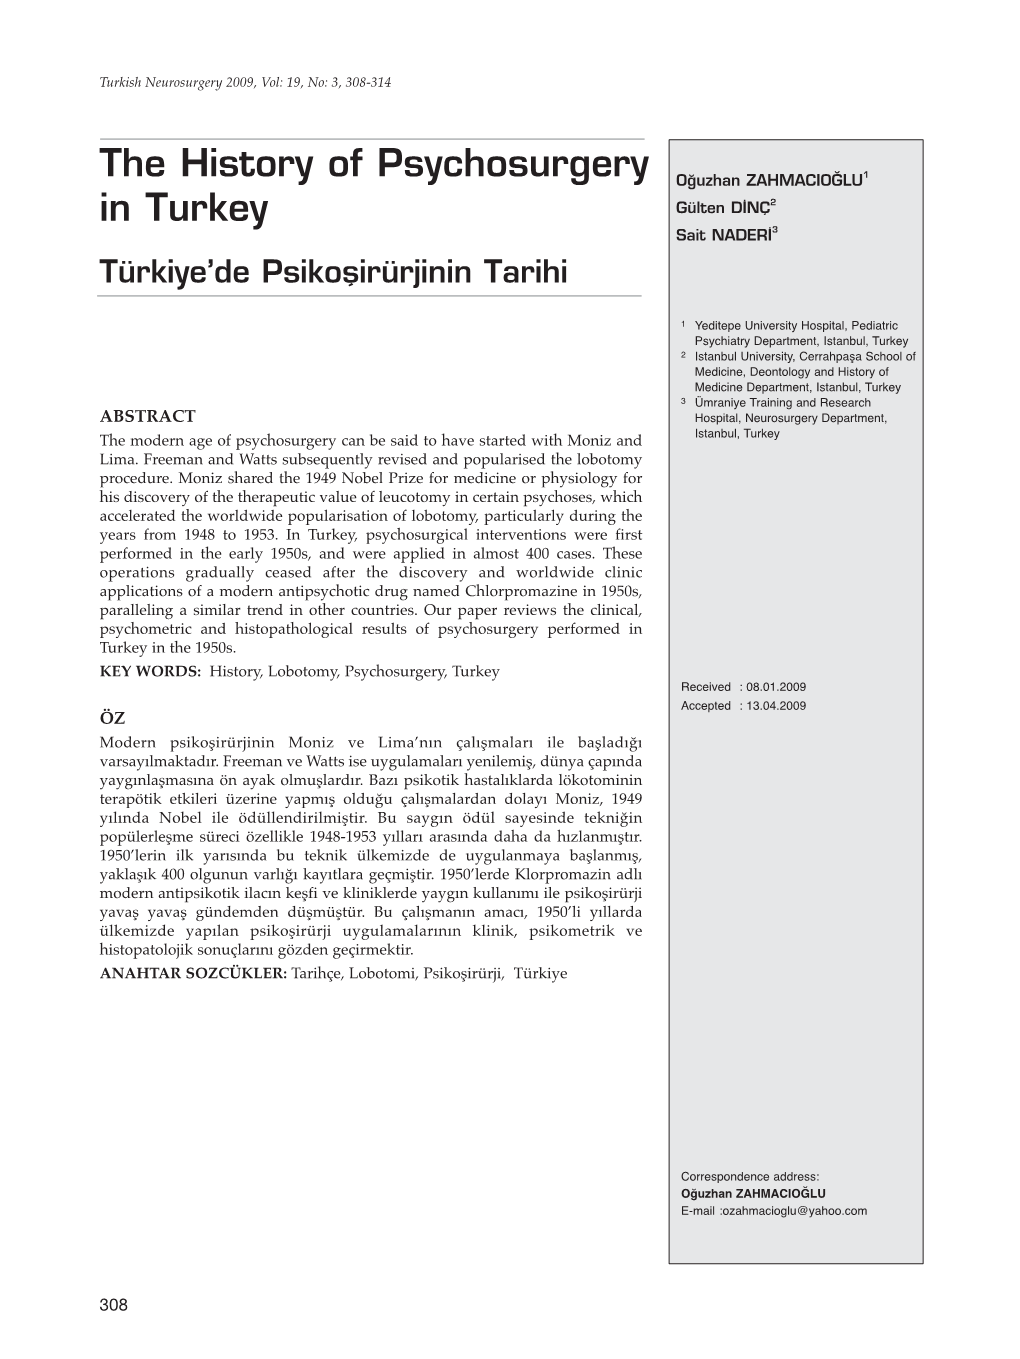 The History of Psychosurgery in Turkey